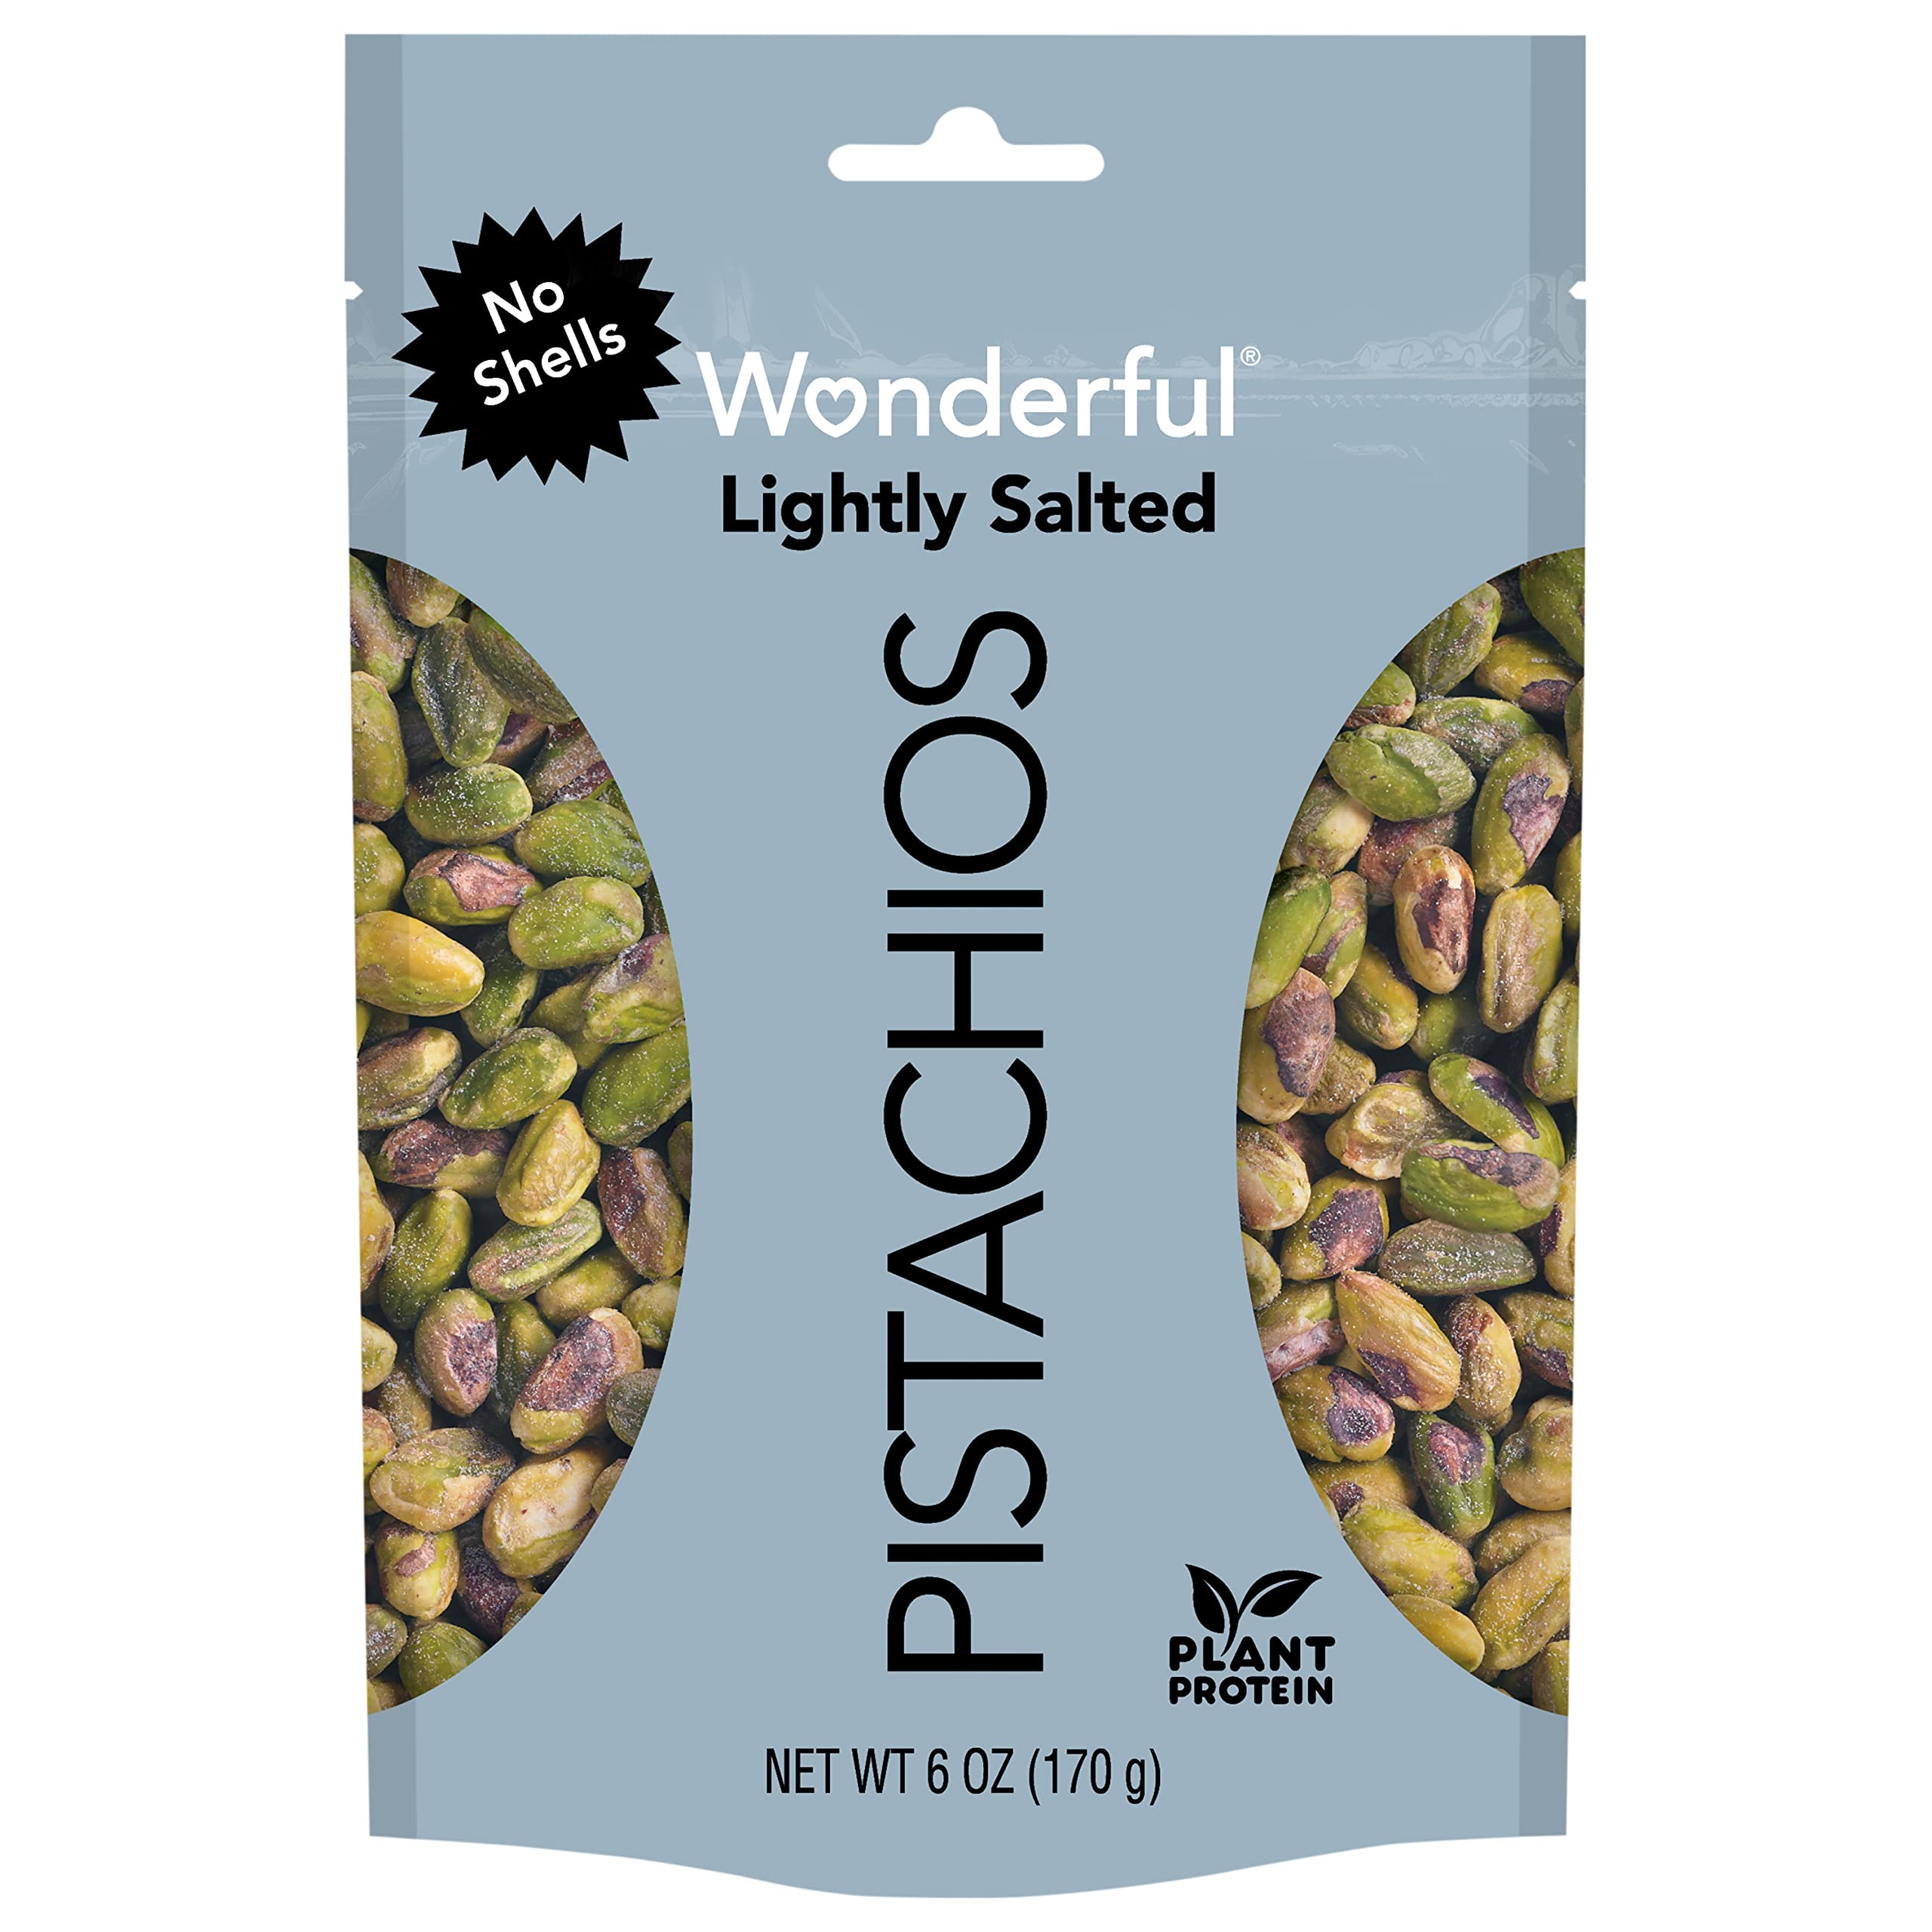 Wonderful Pistachios, No Shells, Lightly Salted Nuts, 6oz Resealable Bag ($3.81 at 15% Sub and Save Discount Level - Prime Ship is Free)